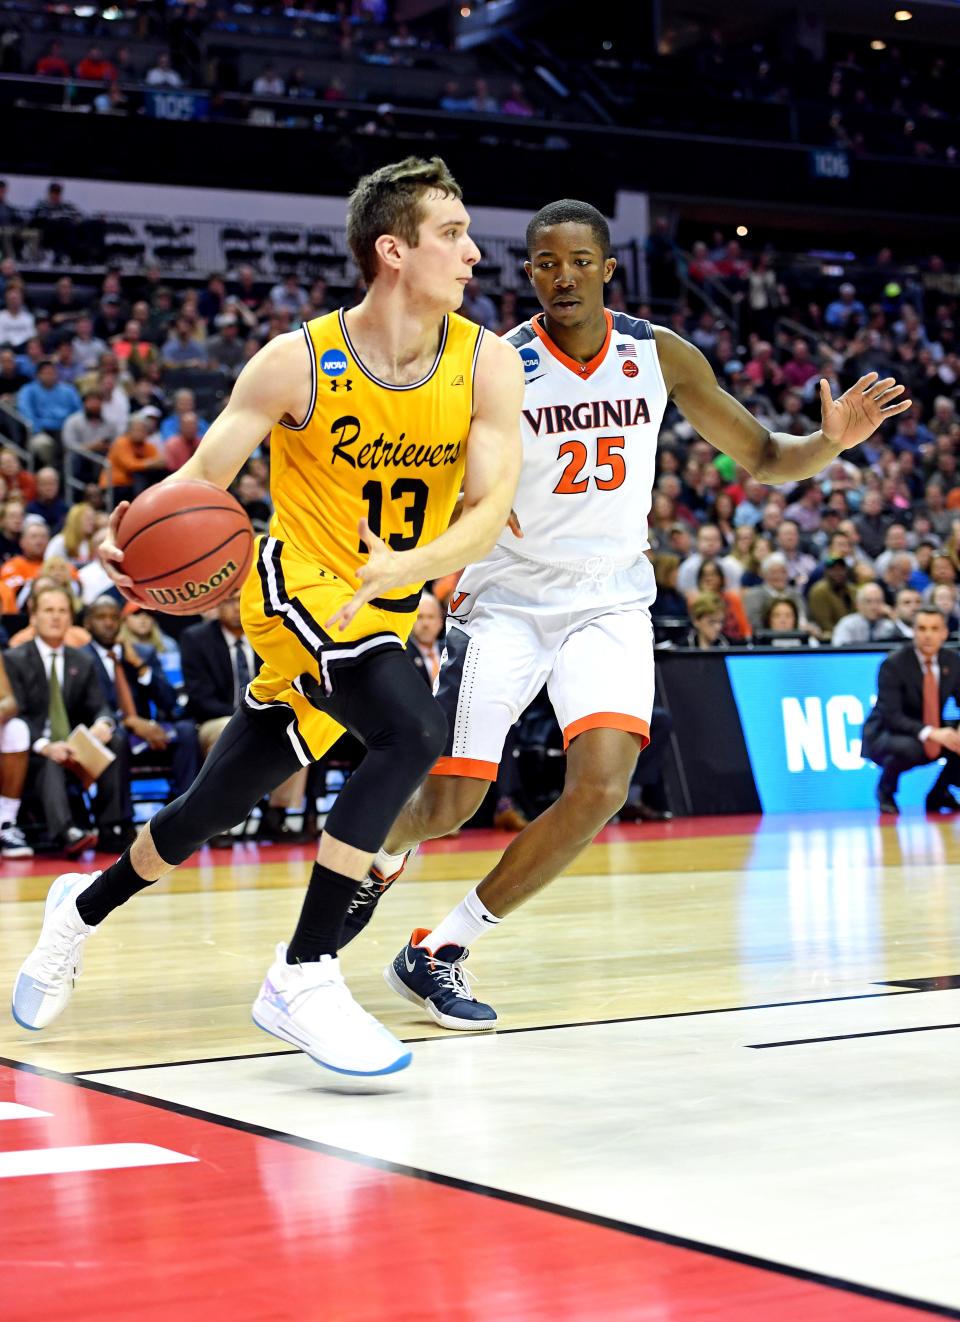 Mar 16, 2018; Charlotte, NC, USA; UMBC Retrievers forward Joe Sherburne (13) drives to the basket against Virginia Cavaliers forward Mamadi Diakite (25) during the first half in the first round of the 2018 NCAA Tournament at Spectrum Center. Mandatory Credit: Bob Donnan-USA TODAY Sports